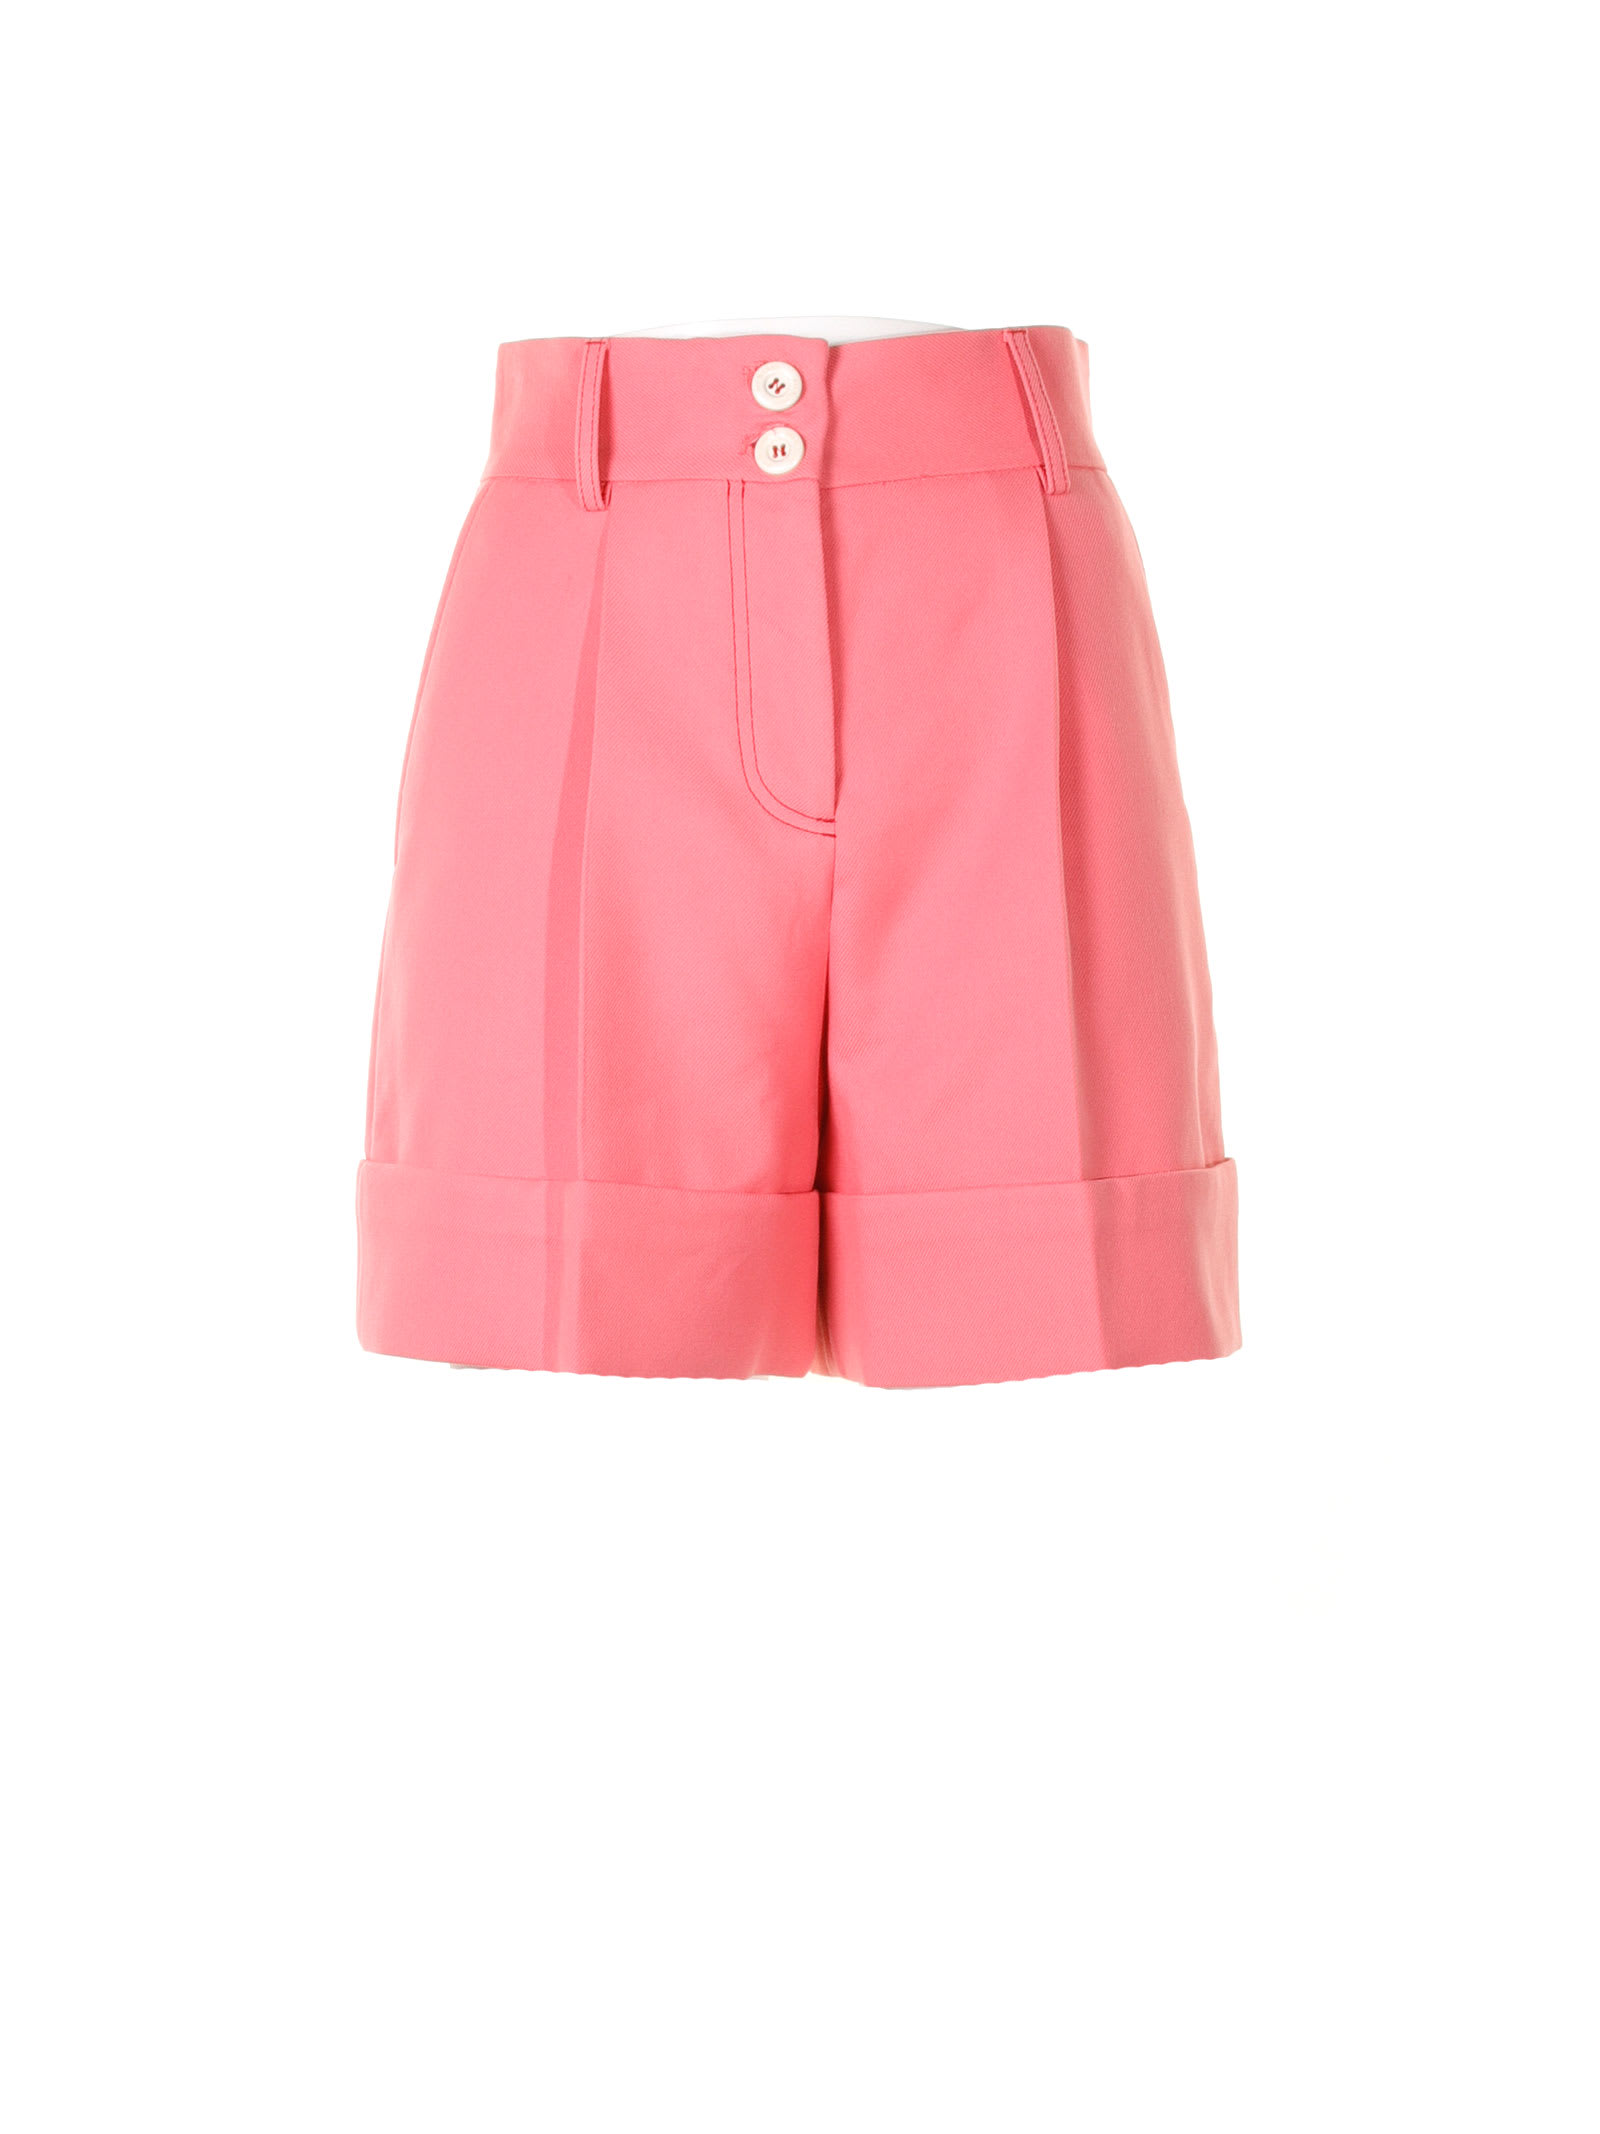 See By Chloé Pink High-waisted Shorts In Sunset Pink